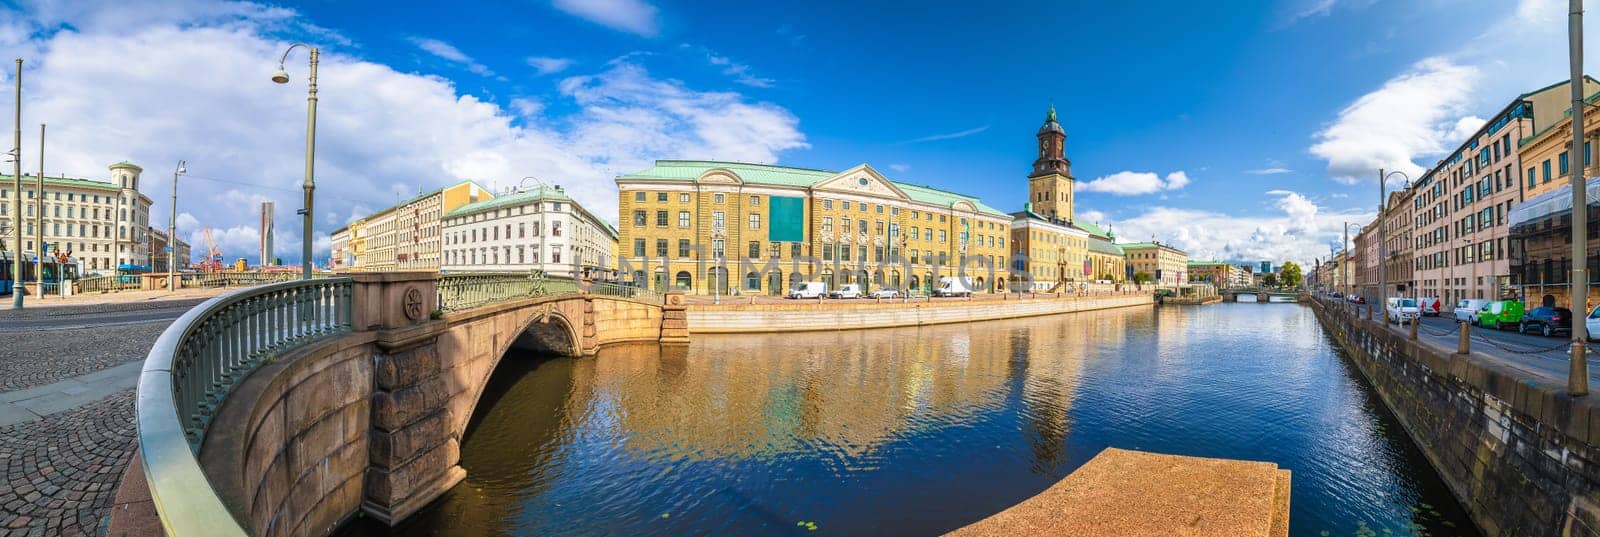 City of Gothenburg channel street architecture panoramic view by xbrchx